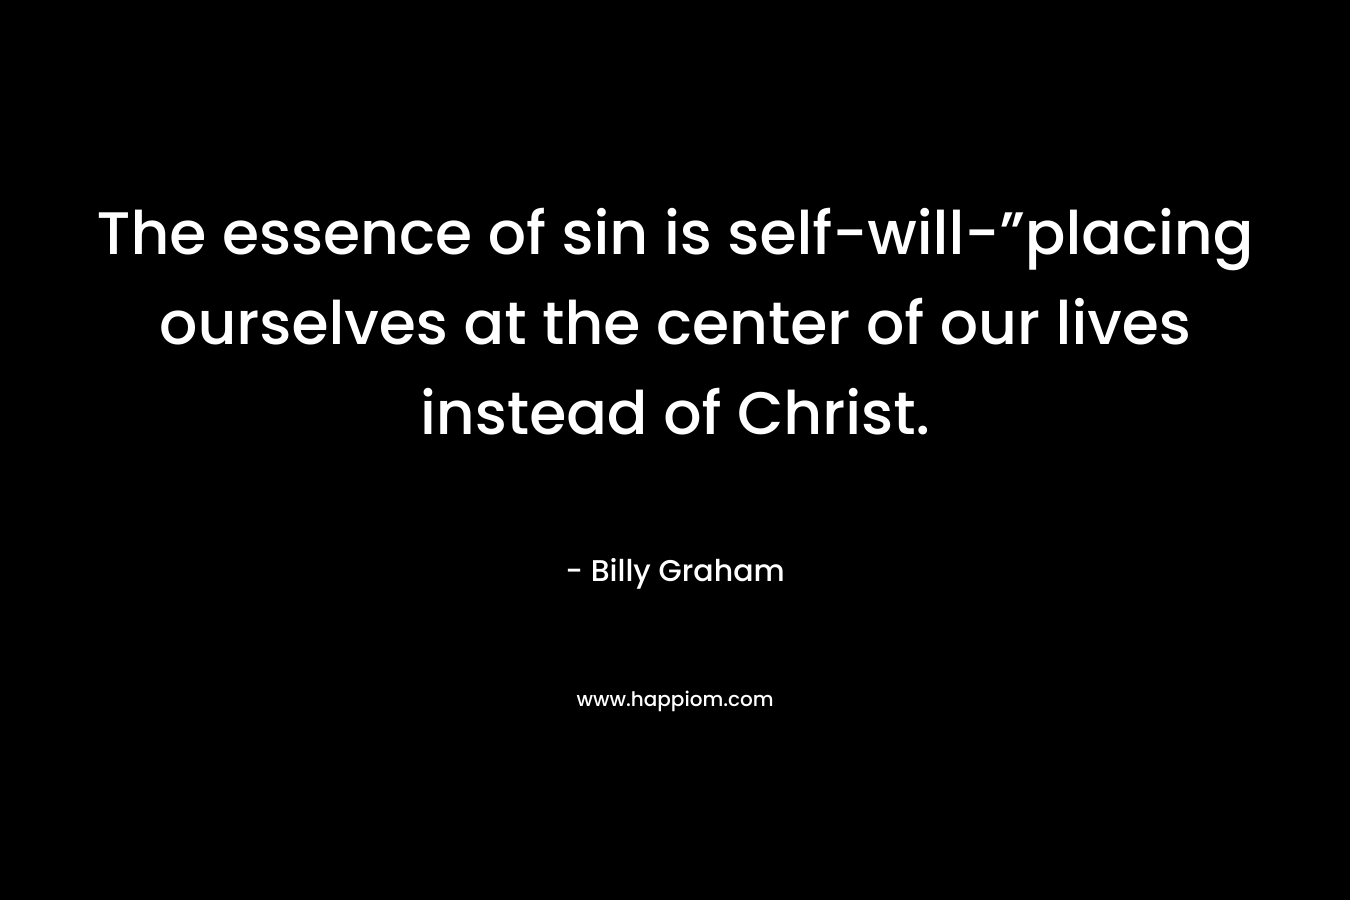 The essence of sin is self-will-”placing ourselves at the center of our lives instead of Christ.